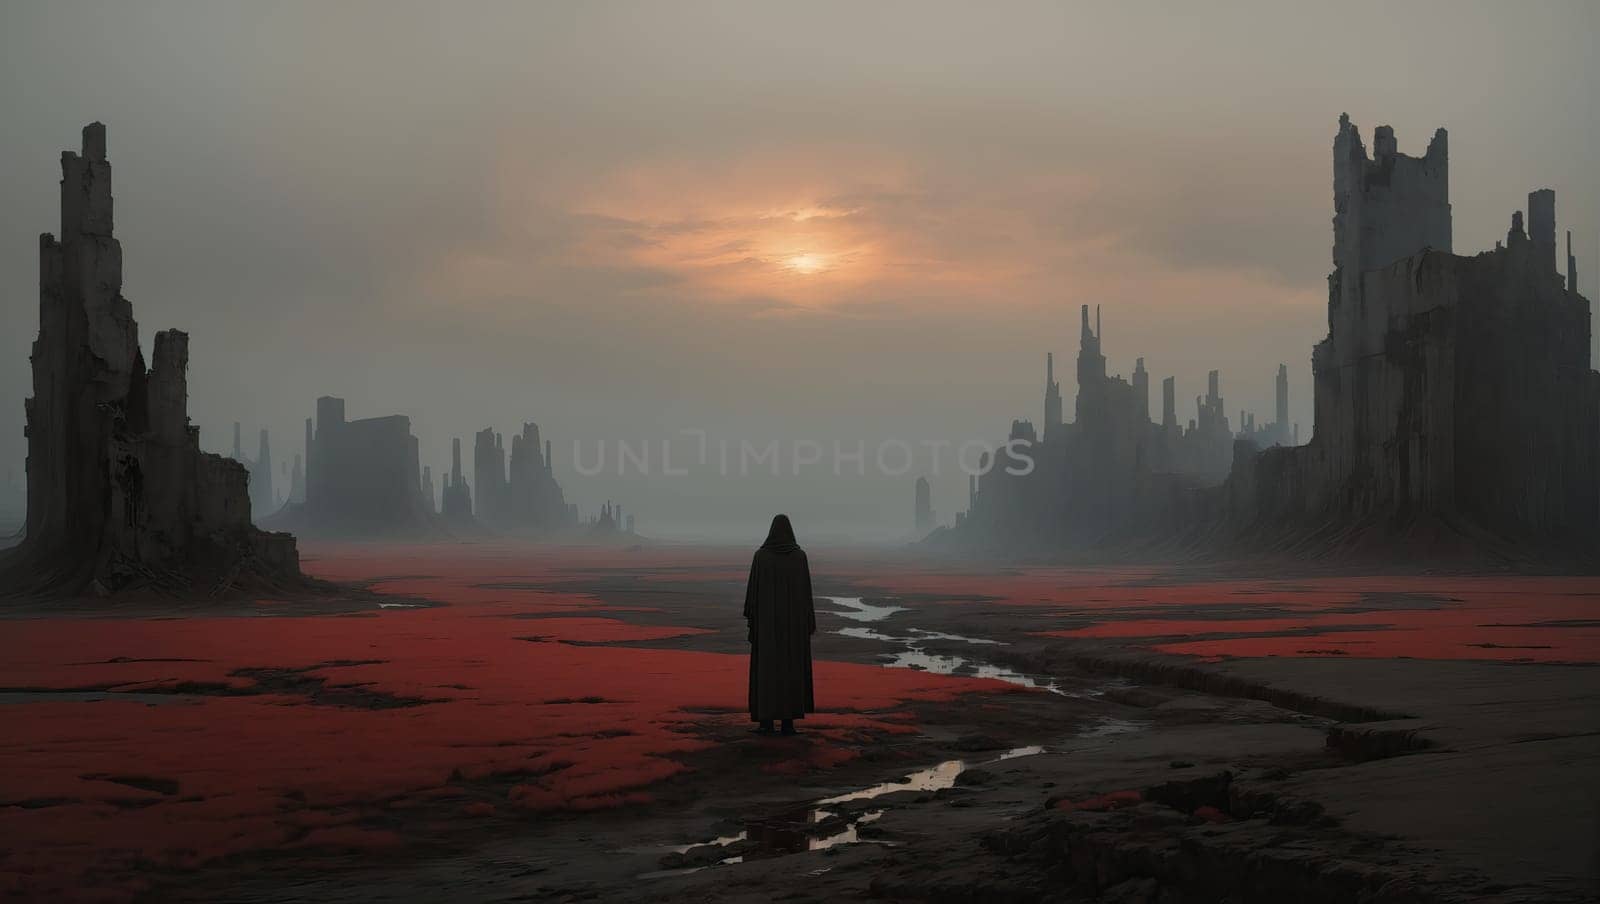 Ruined city apocalyptic desert surreal dark landscape by applesstock